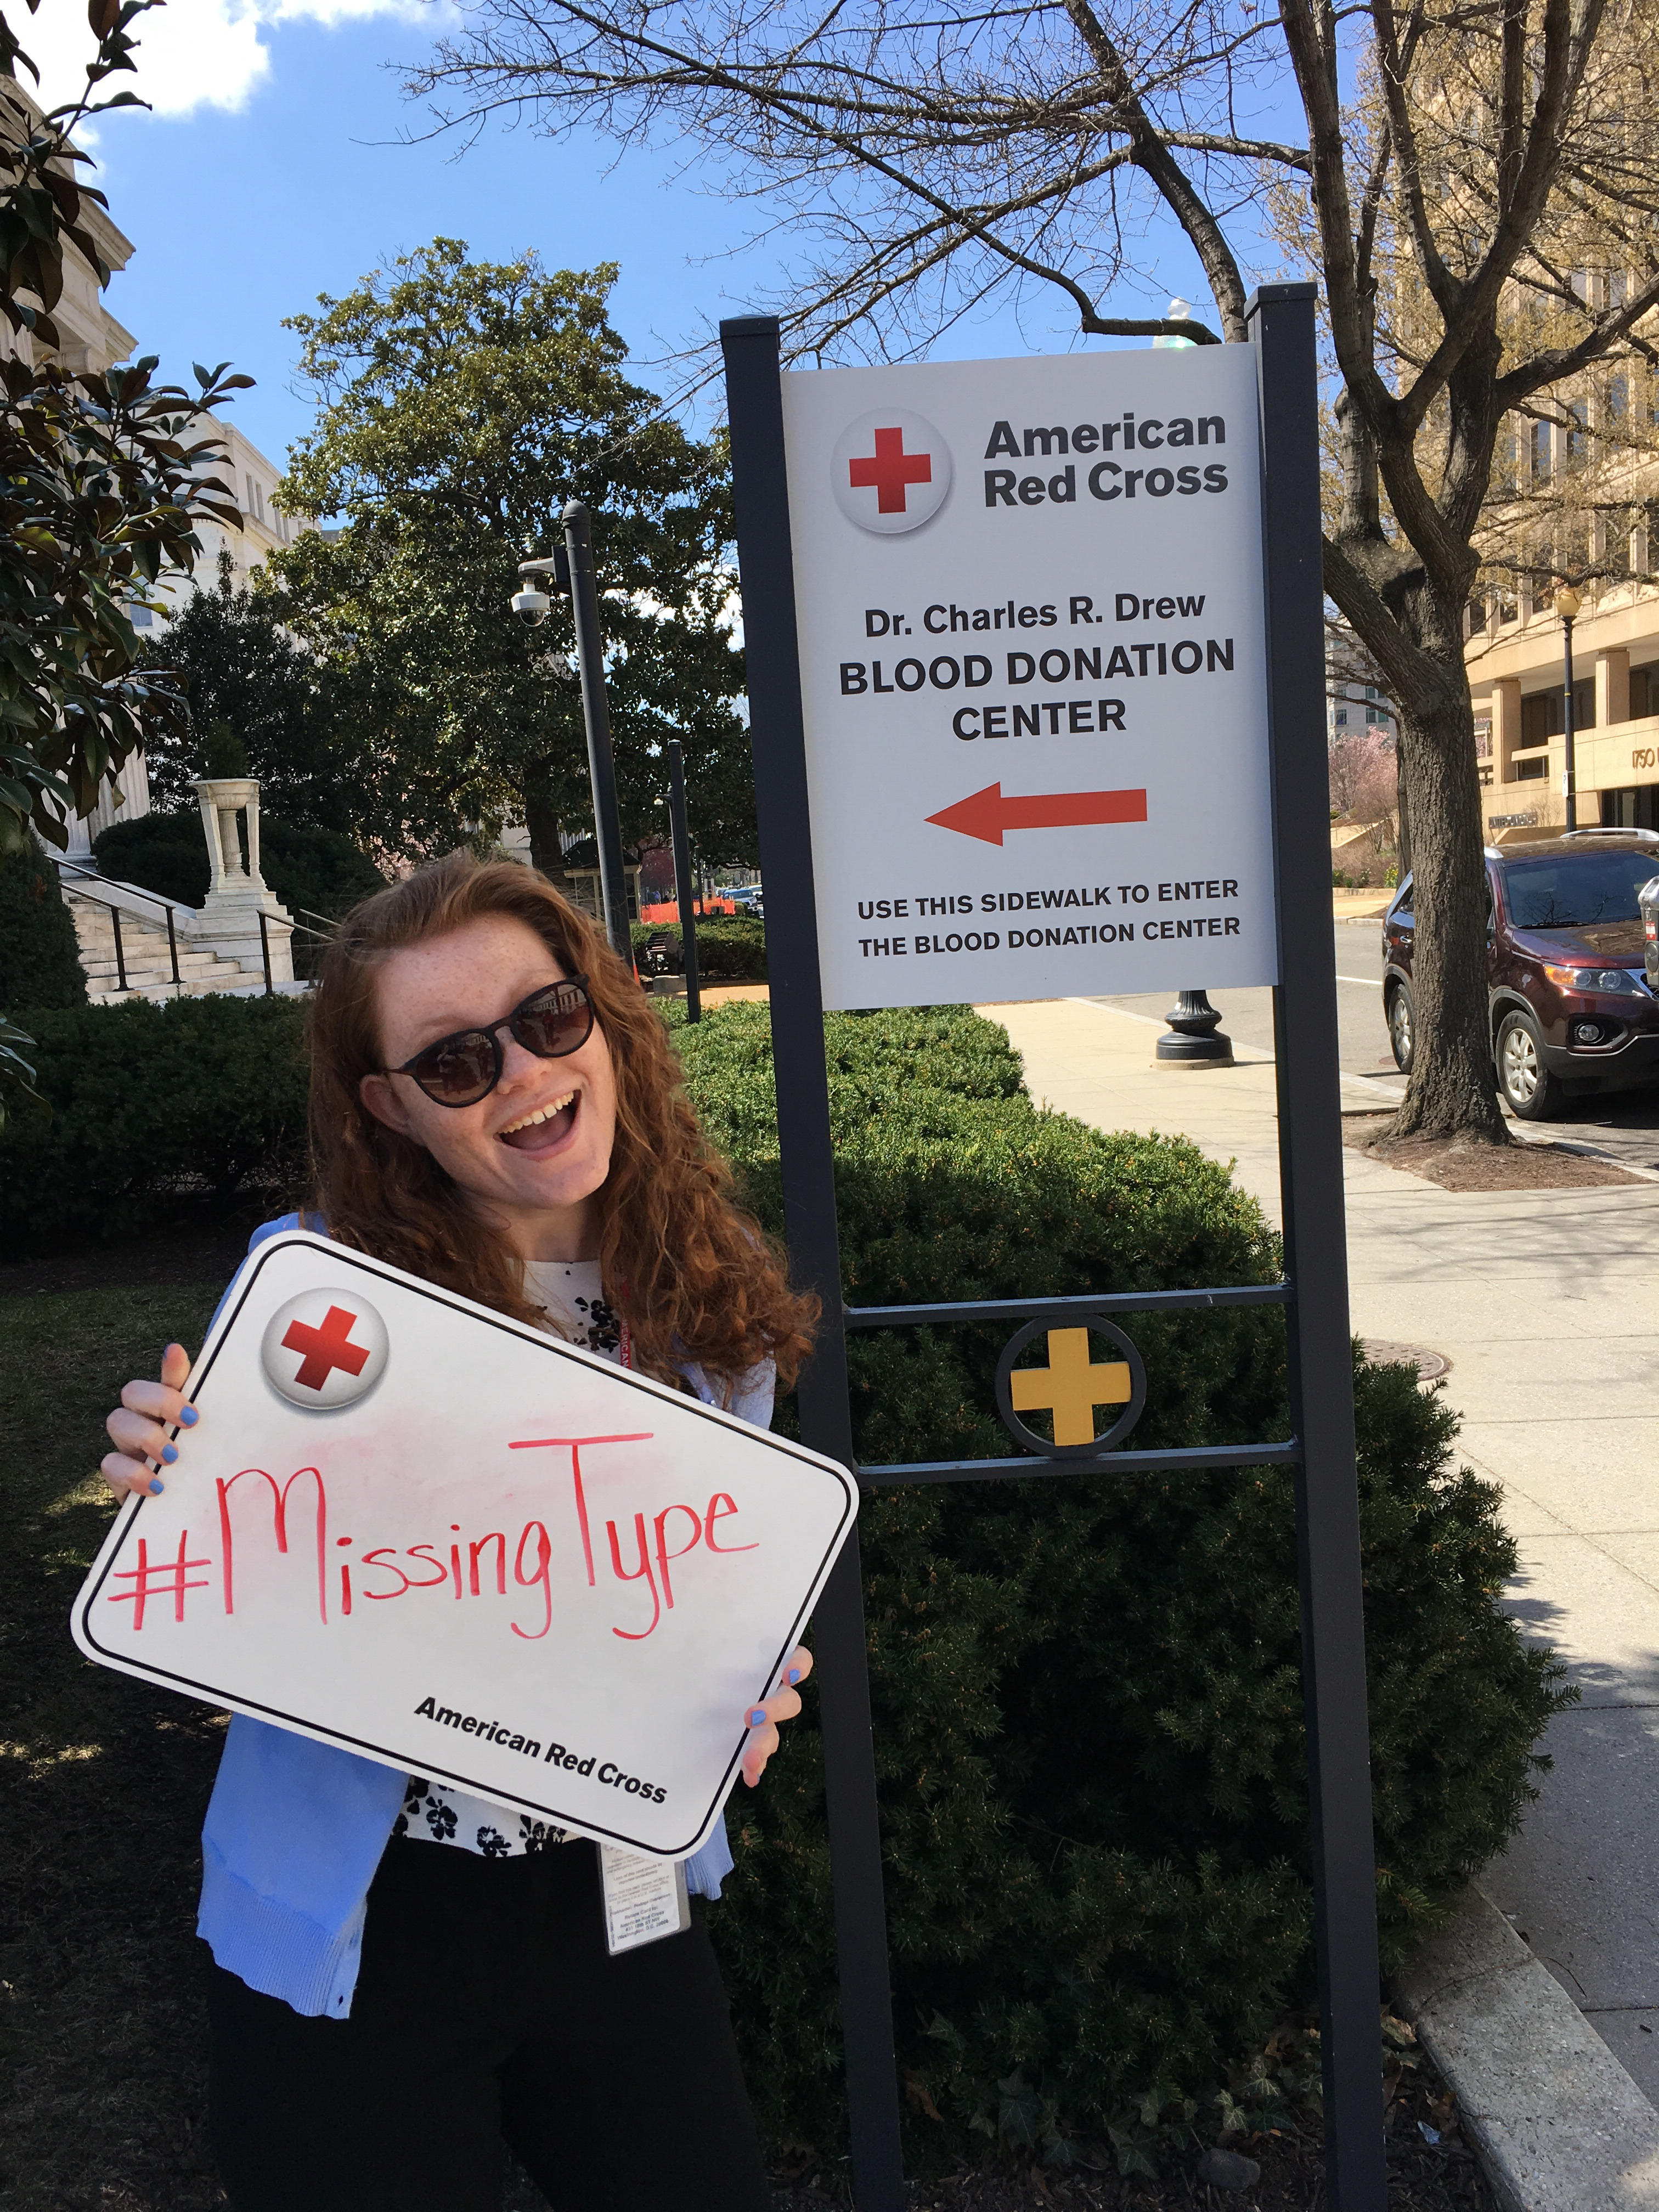 Katie holding a board that says "#MissingType."